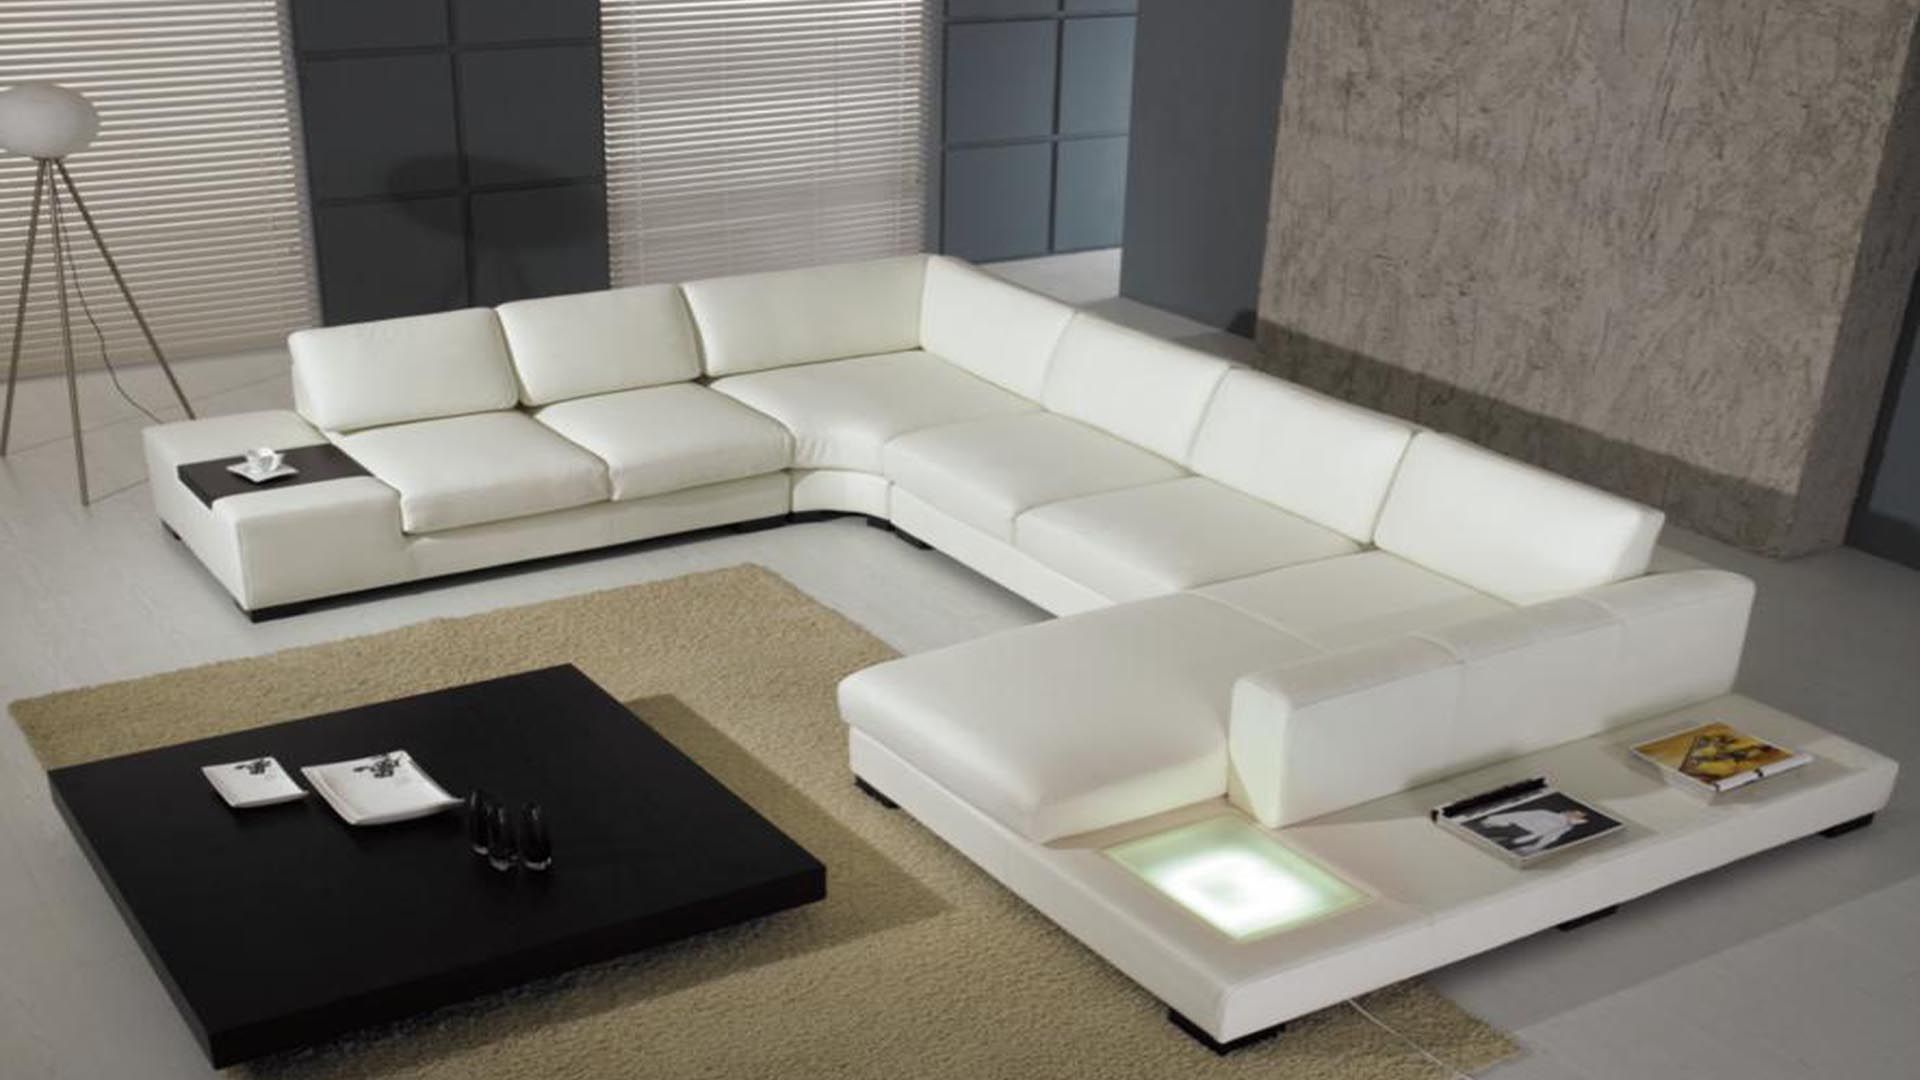 Sectional Sofa Sleepers For Better Sleep Quality And Pertaining To 3pc Ledgemere Modern Sectional Sofas (View 6 of 15)